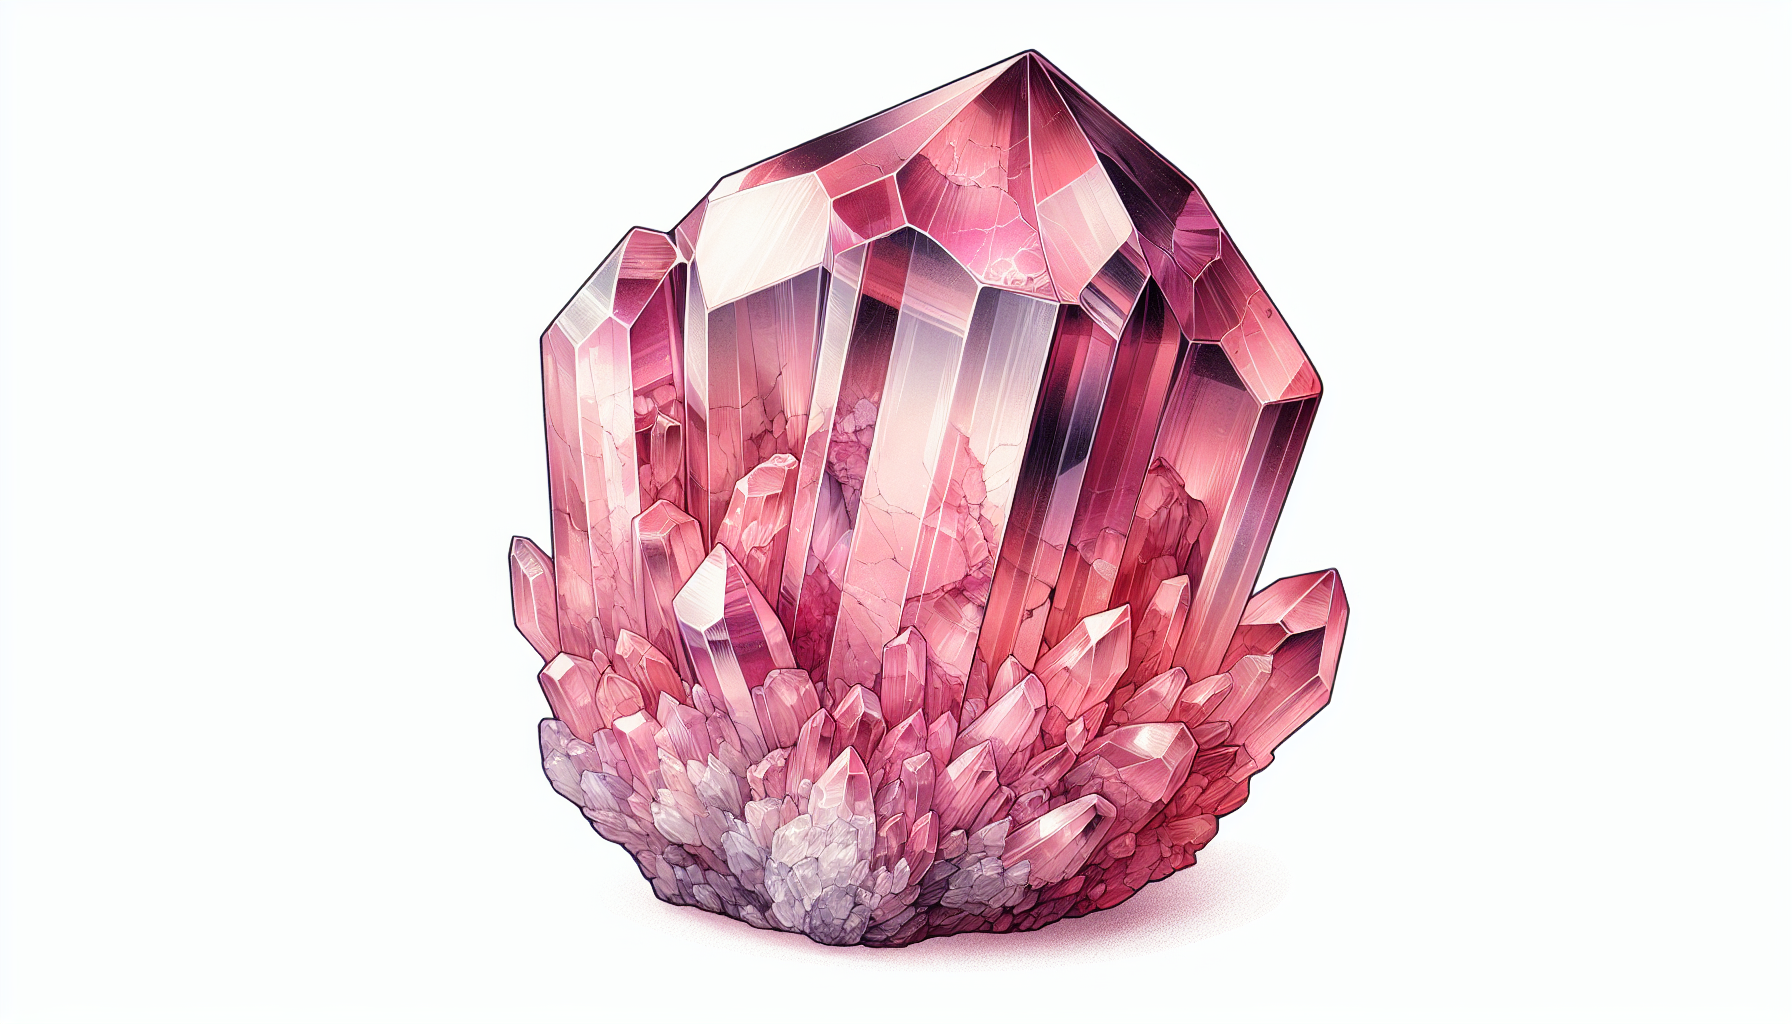 Illustration of a pink rose quartz crystal with natural imperfections